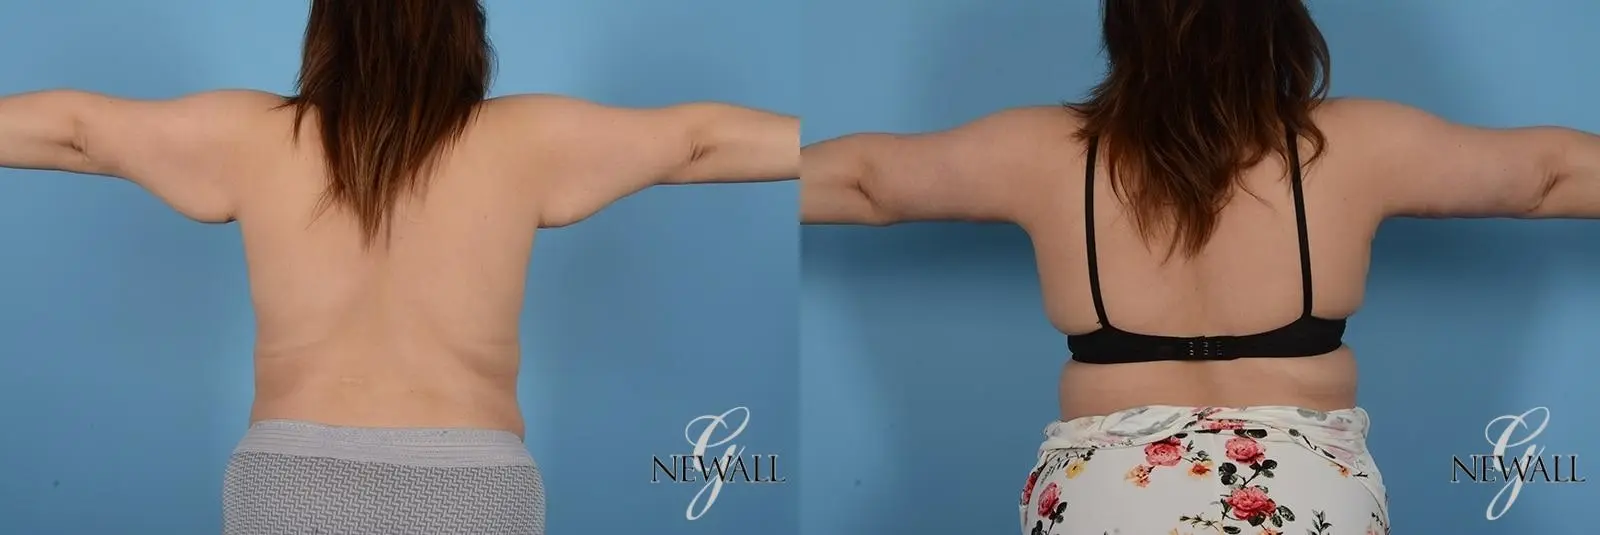 Brachioplasty: Patient 2 - Before and After  